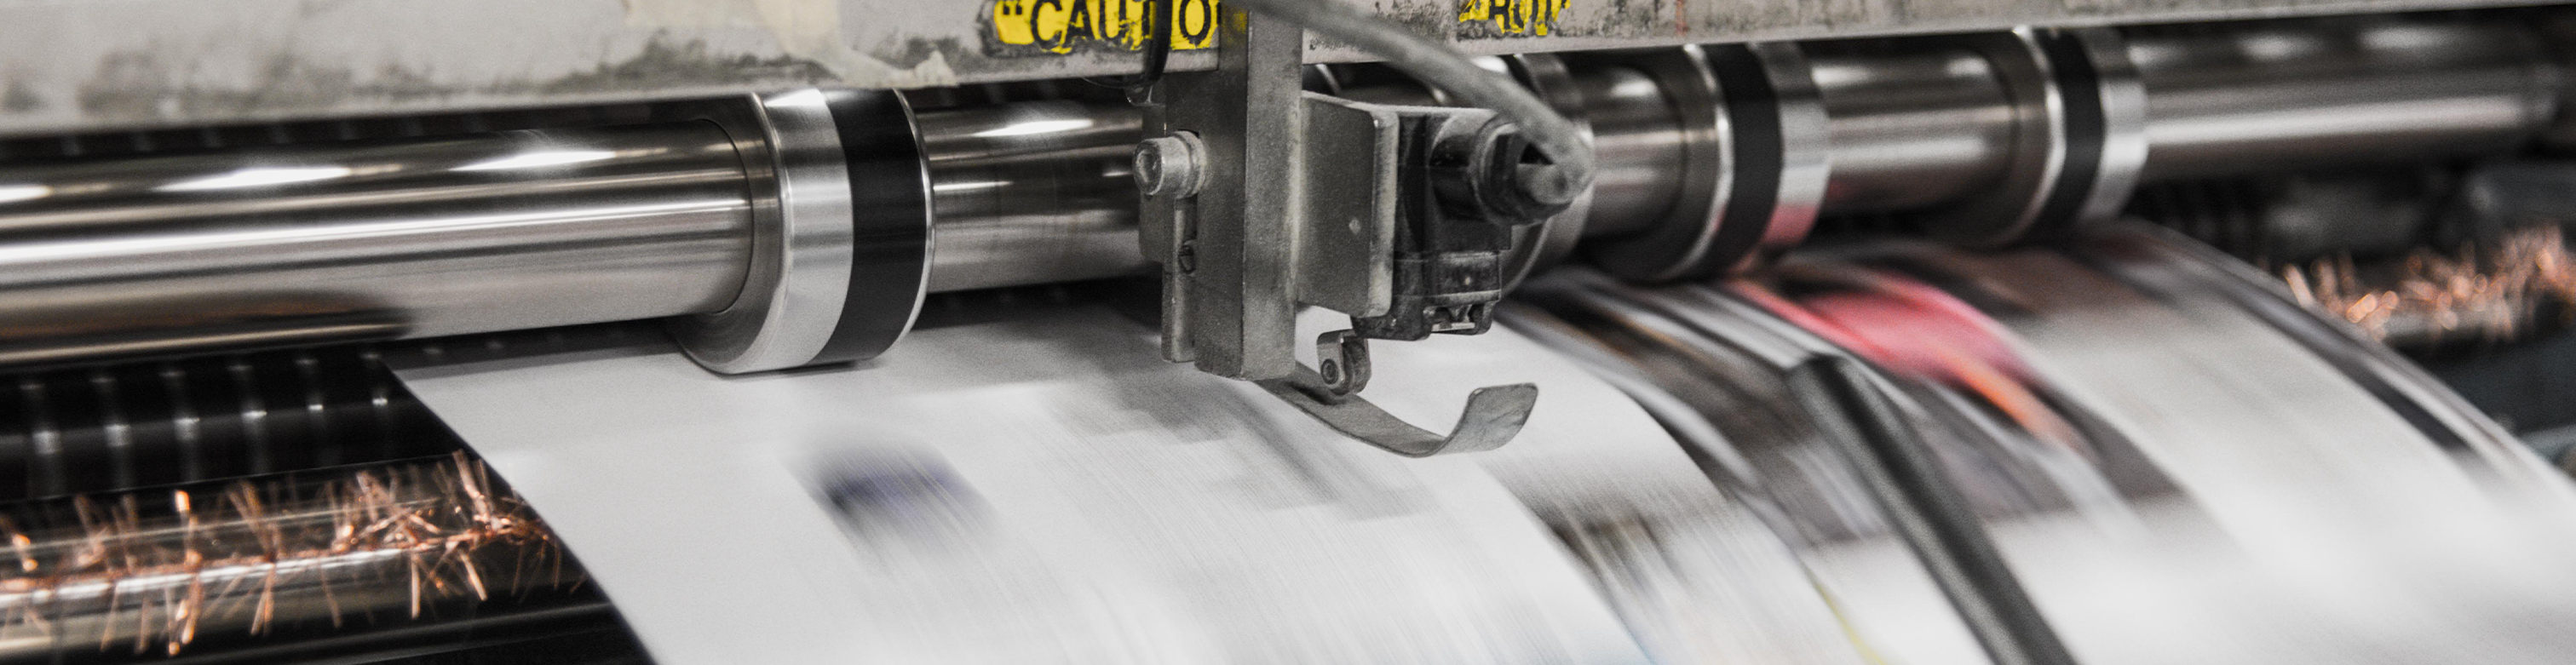 A close-up of a printing press as paper is being printed on. The paper is motion-blurred.